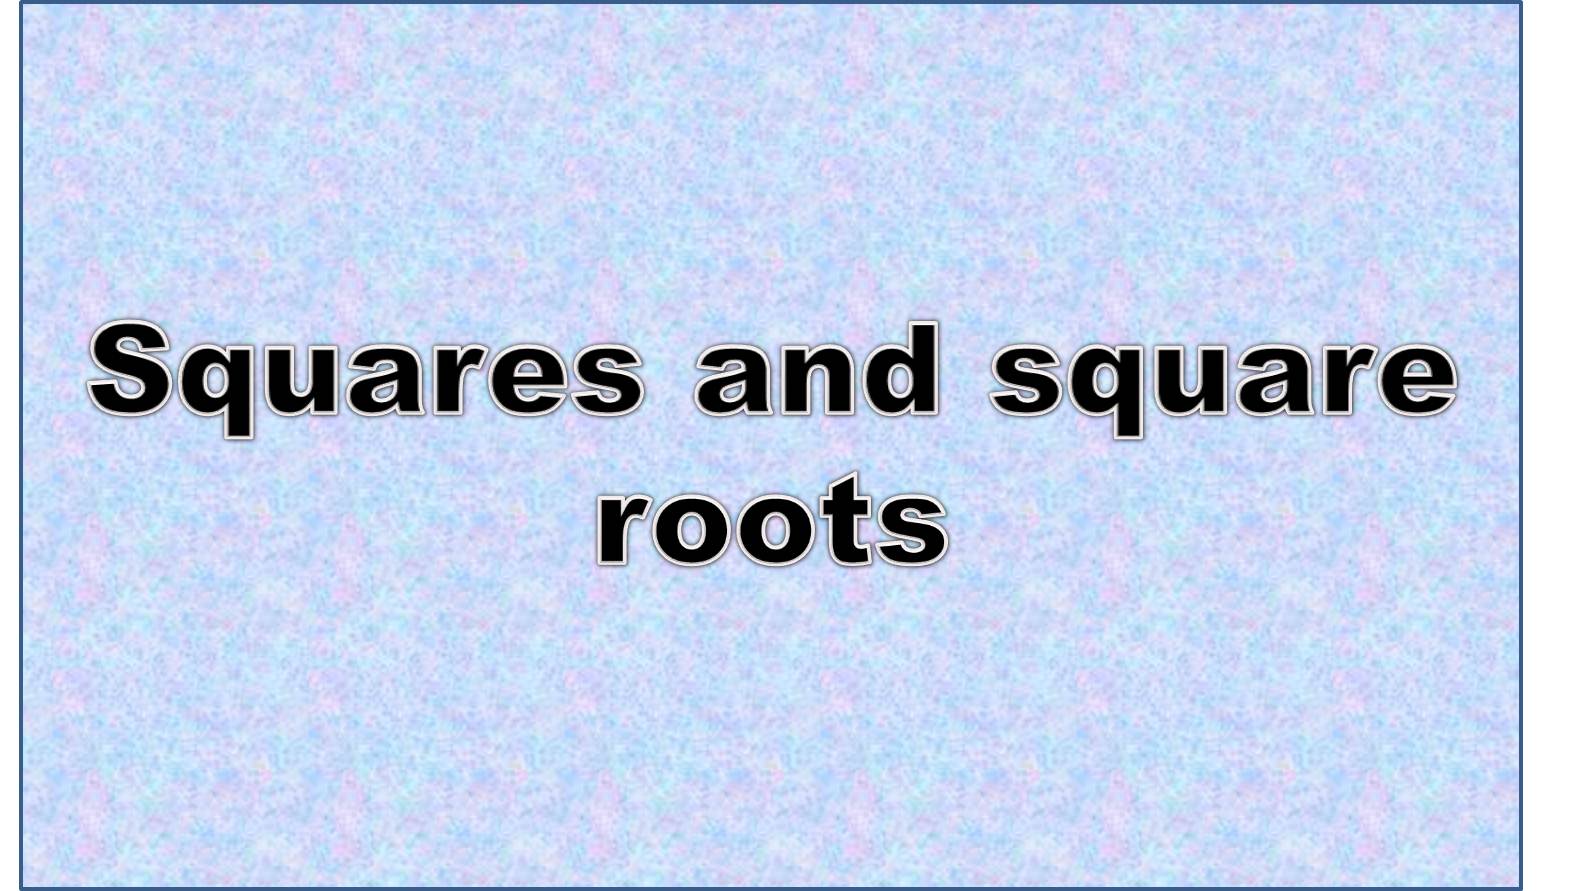 http://study.aisectonline.com/images/Intro to square roots.jpg